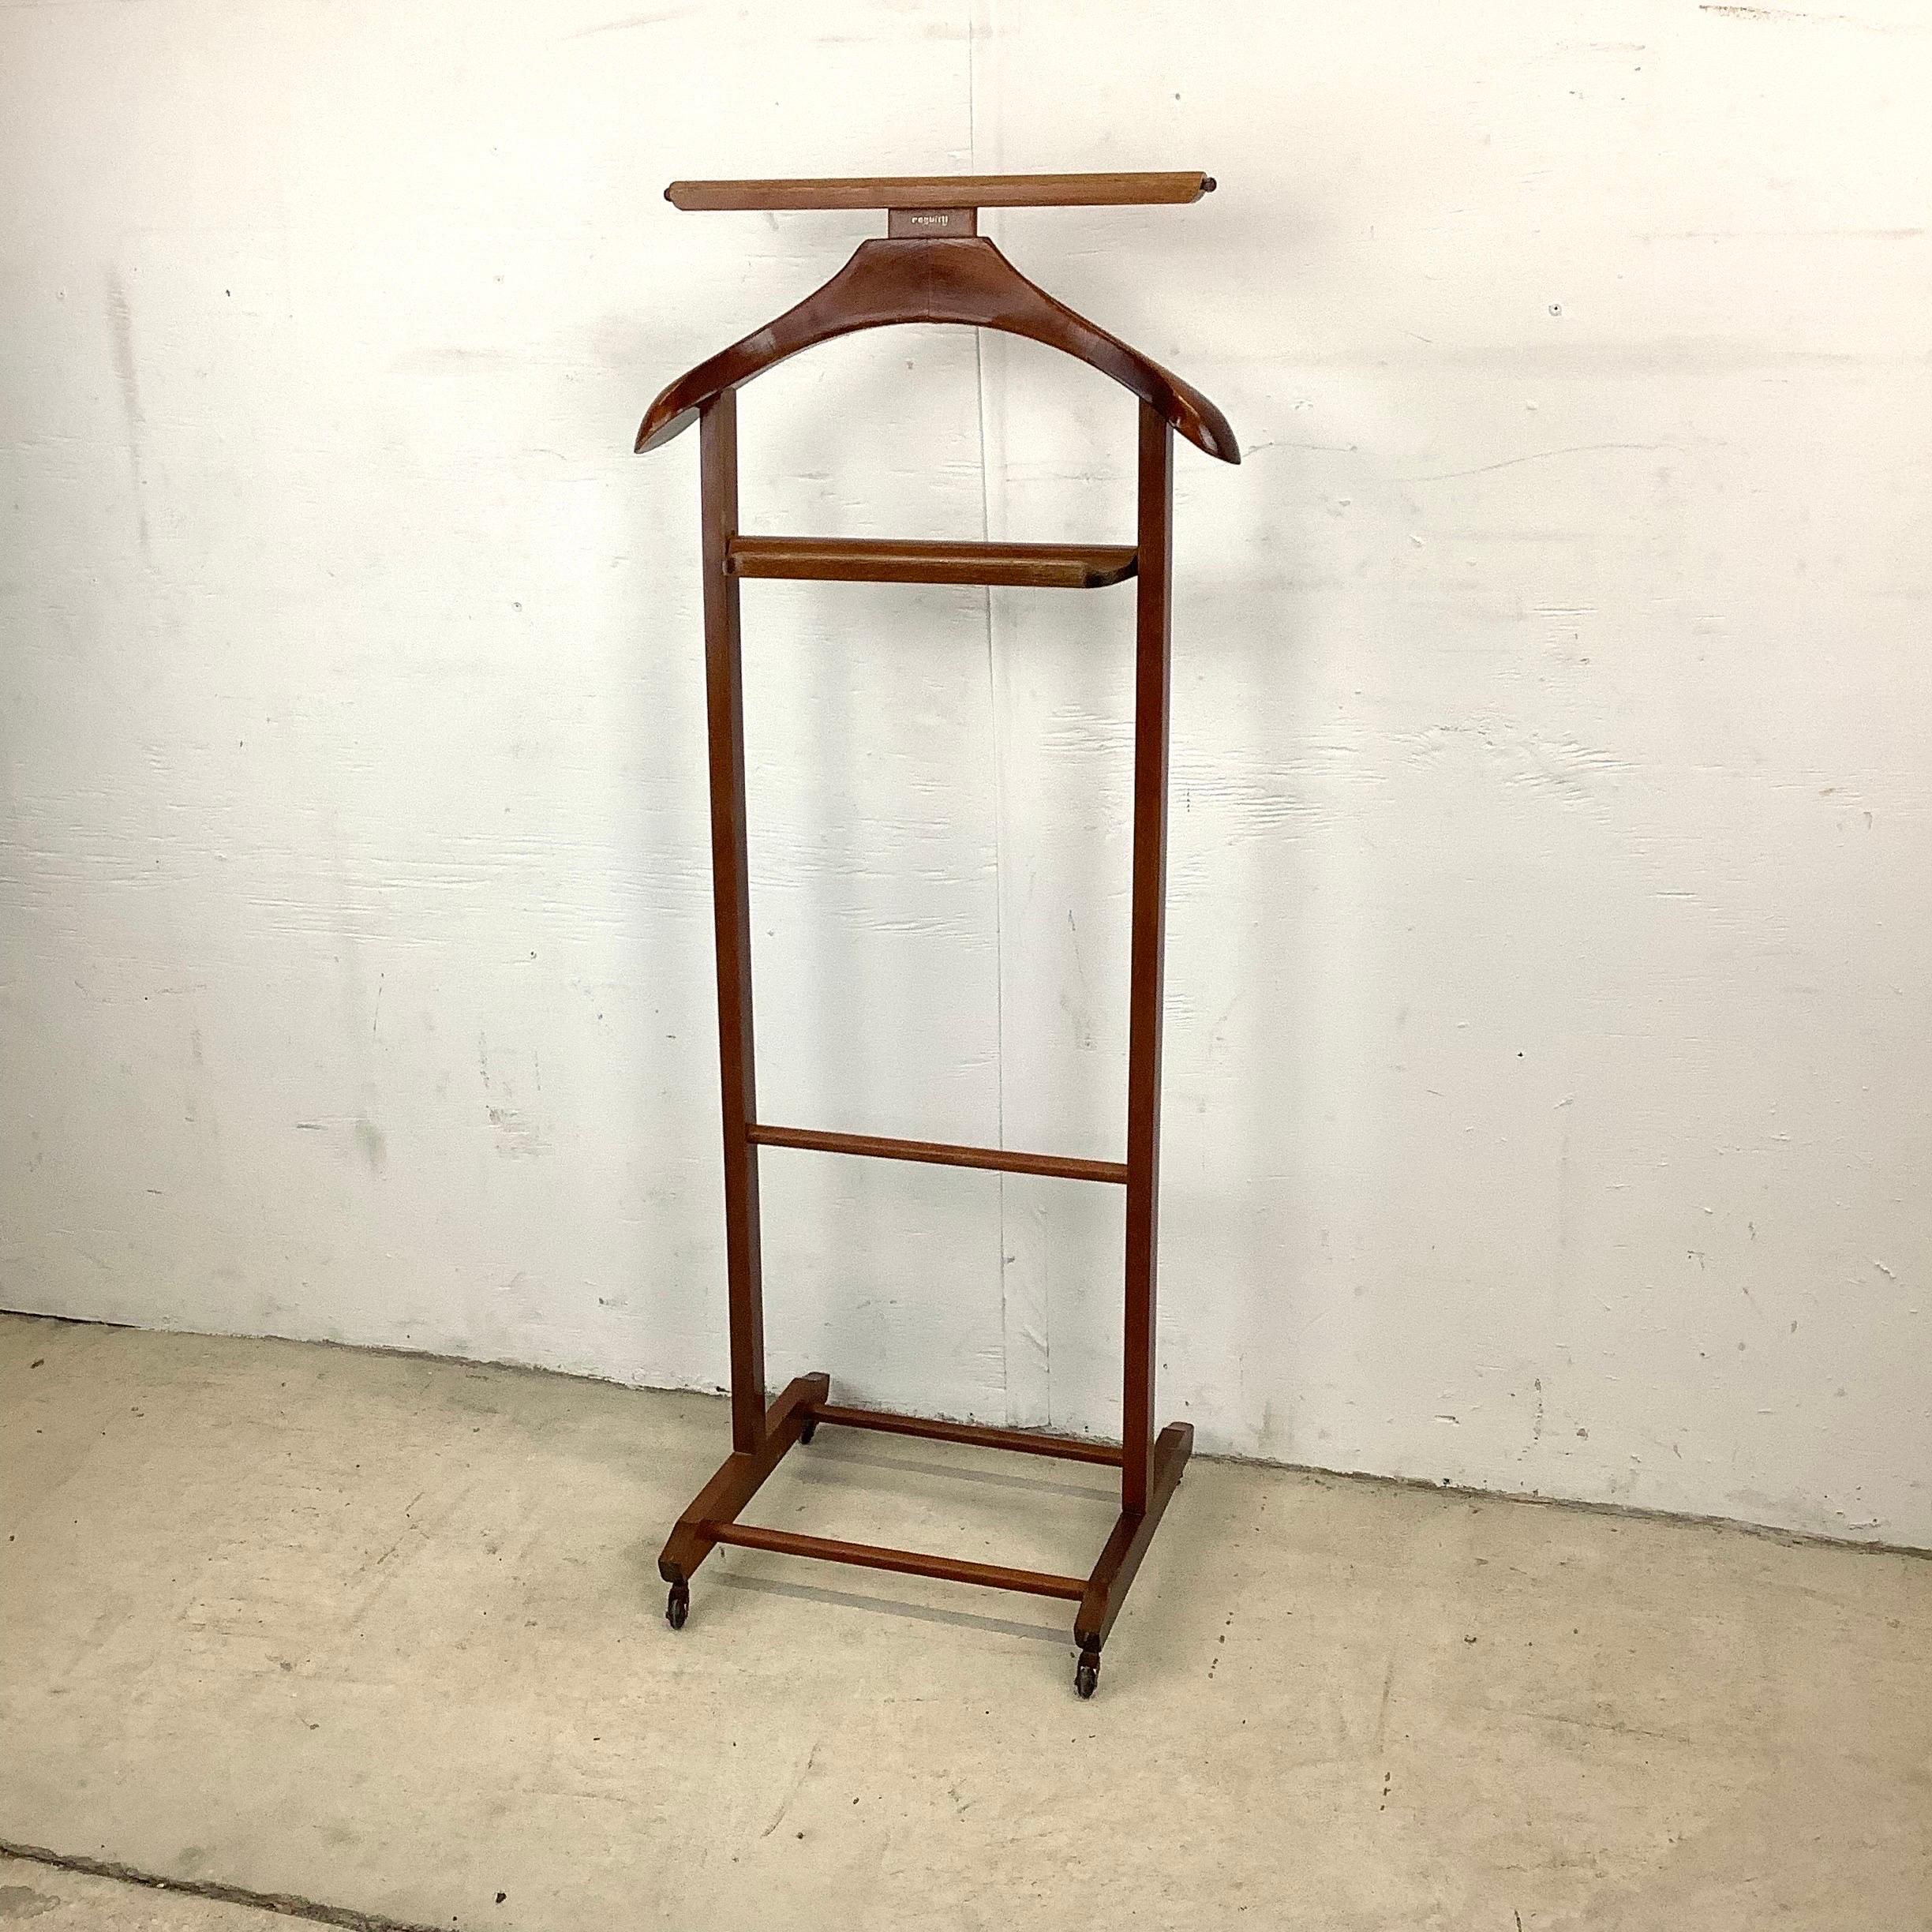 This freestanding vintage valet makes a perfect accessory for dressing areas or bedroom- marked by the manufacturer Fratelli Reguitti with design attributed to famed mid-century Italian designer Ico Parisi. This simple yet practical valet stand adds